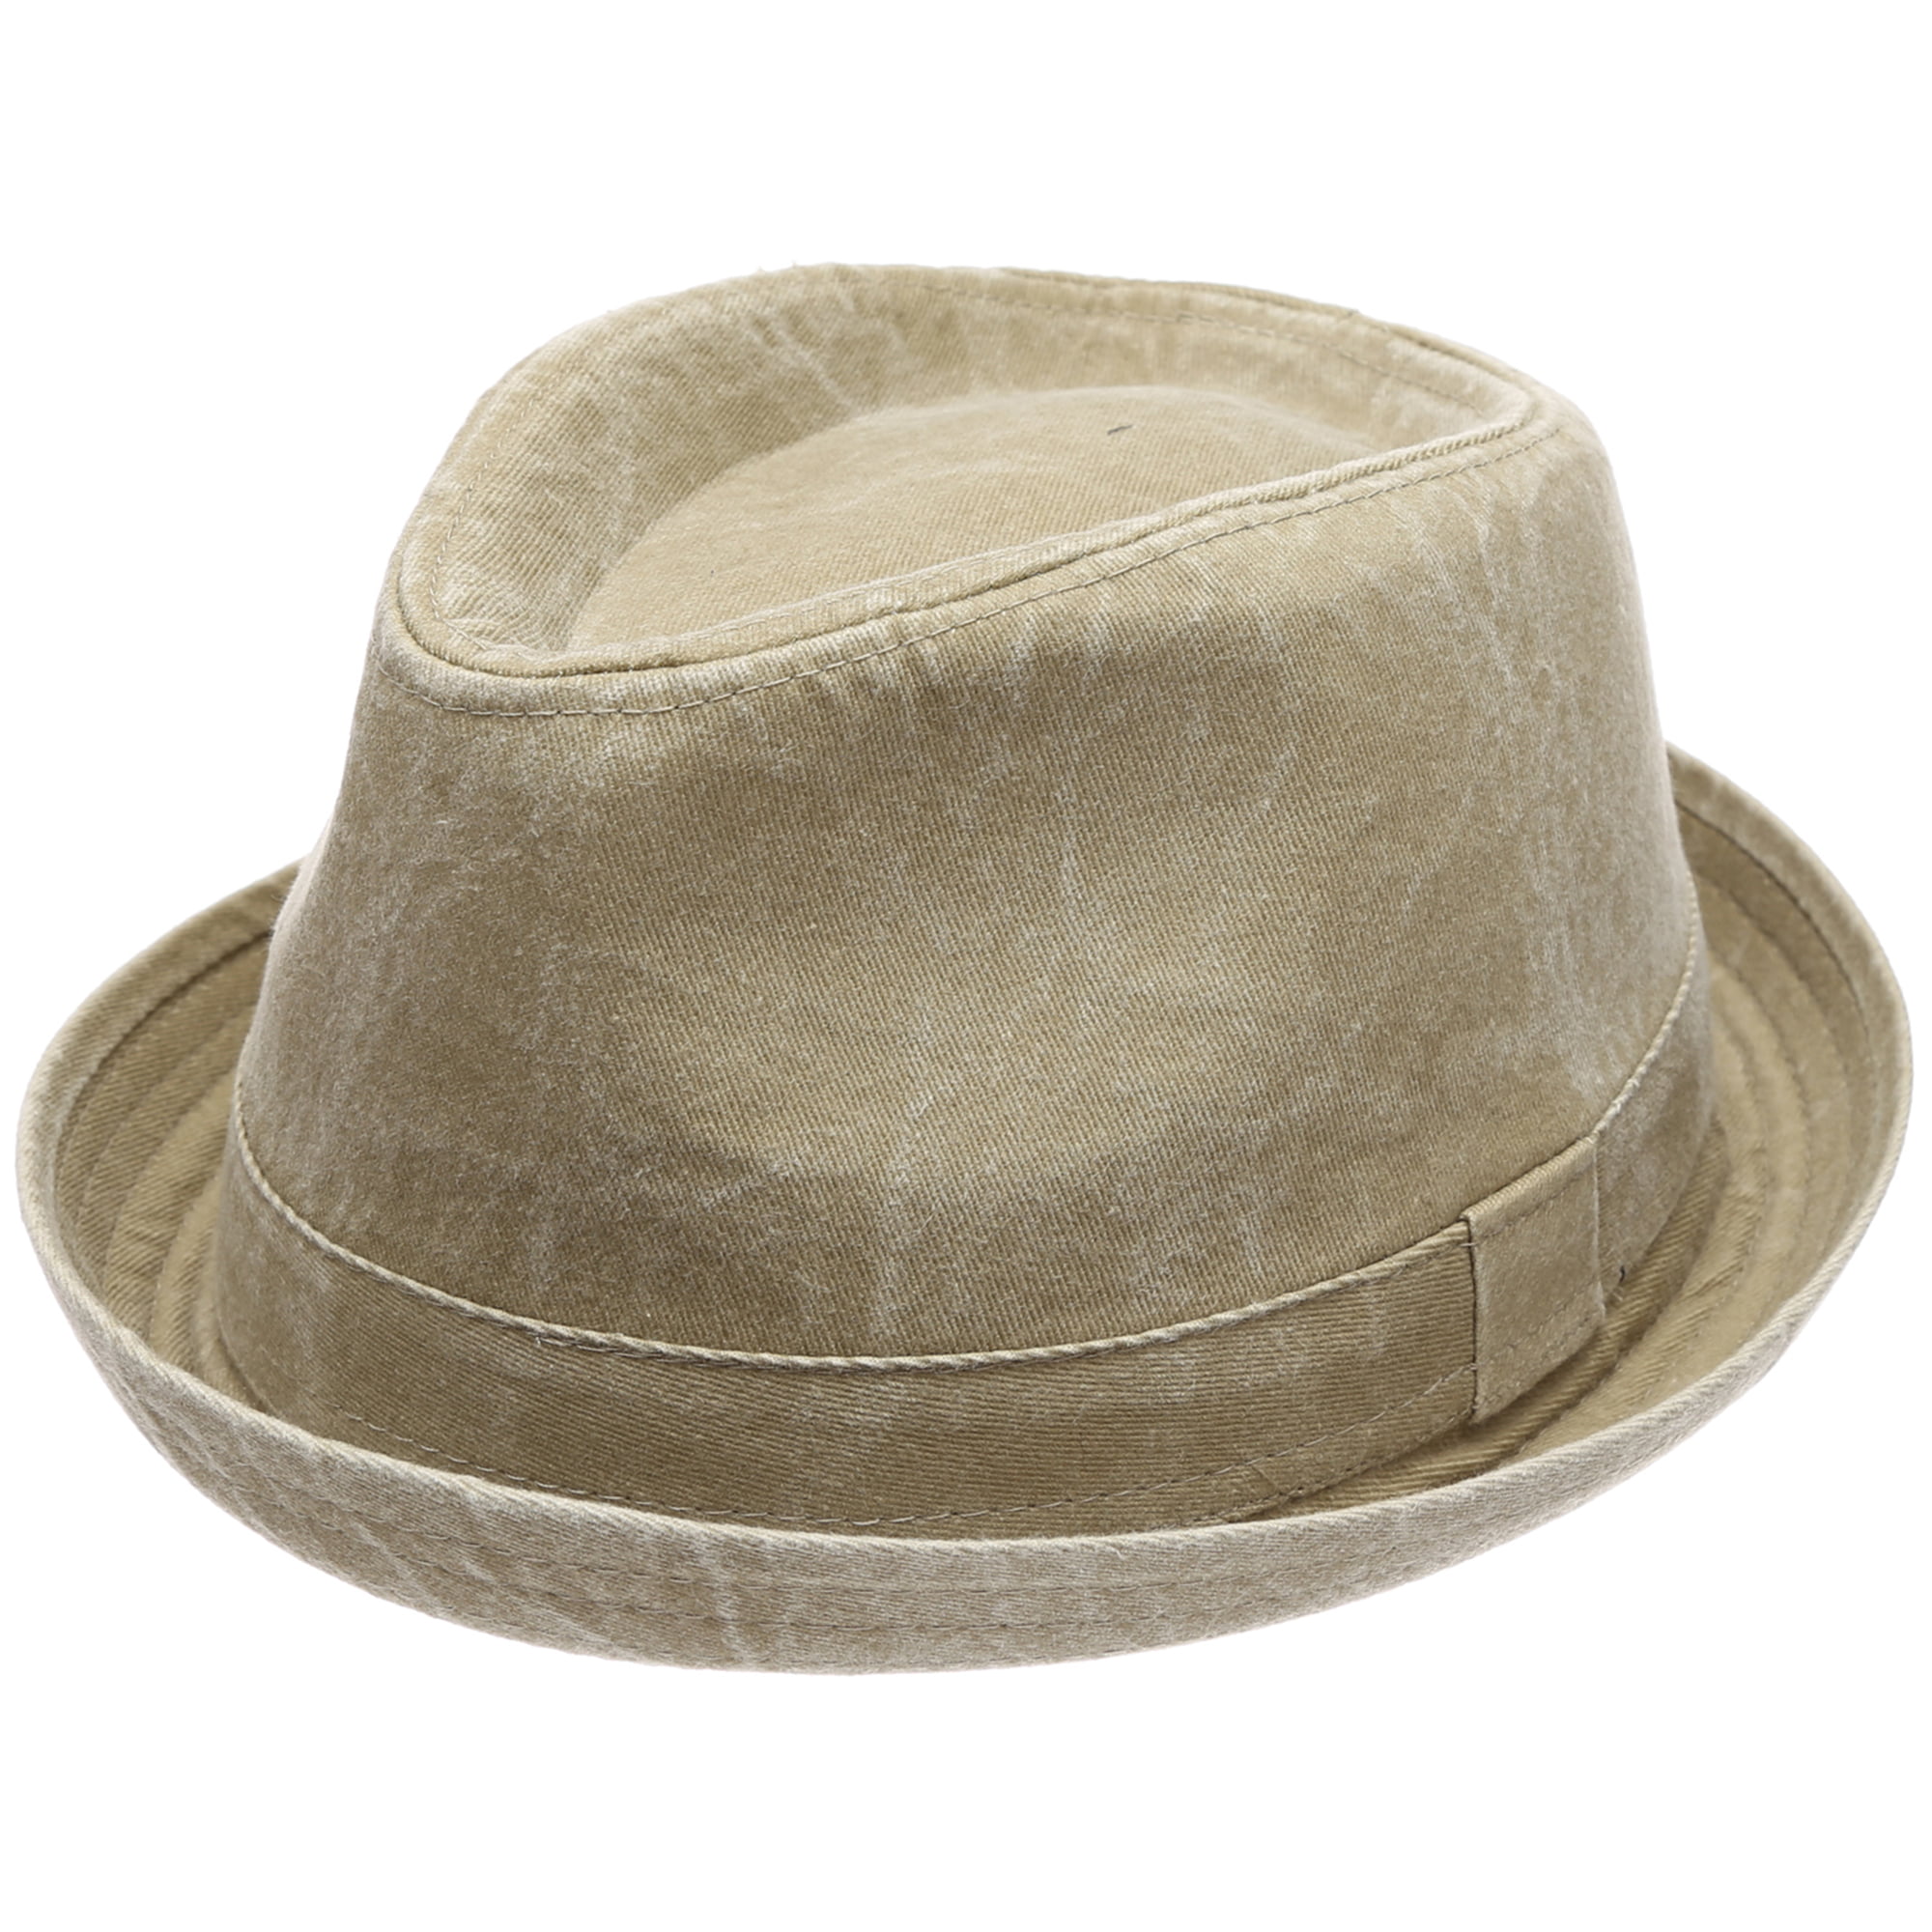 Mens Casual Vintage Style Washed Cotton Fedora Hat 